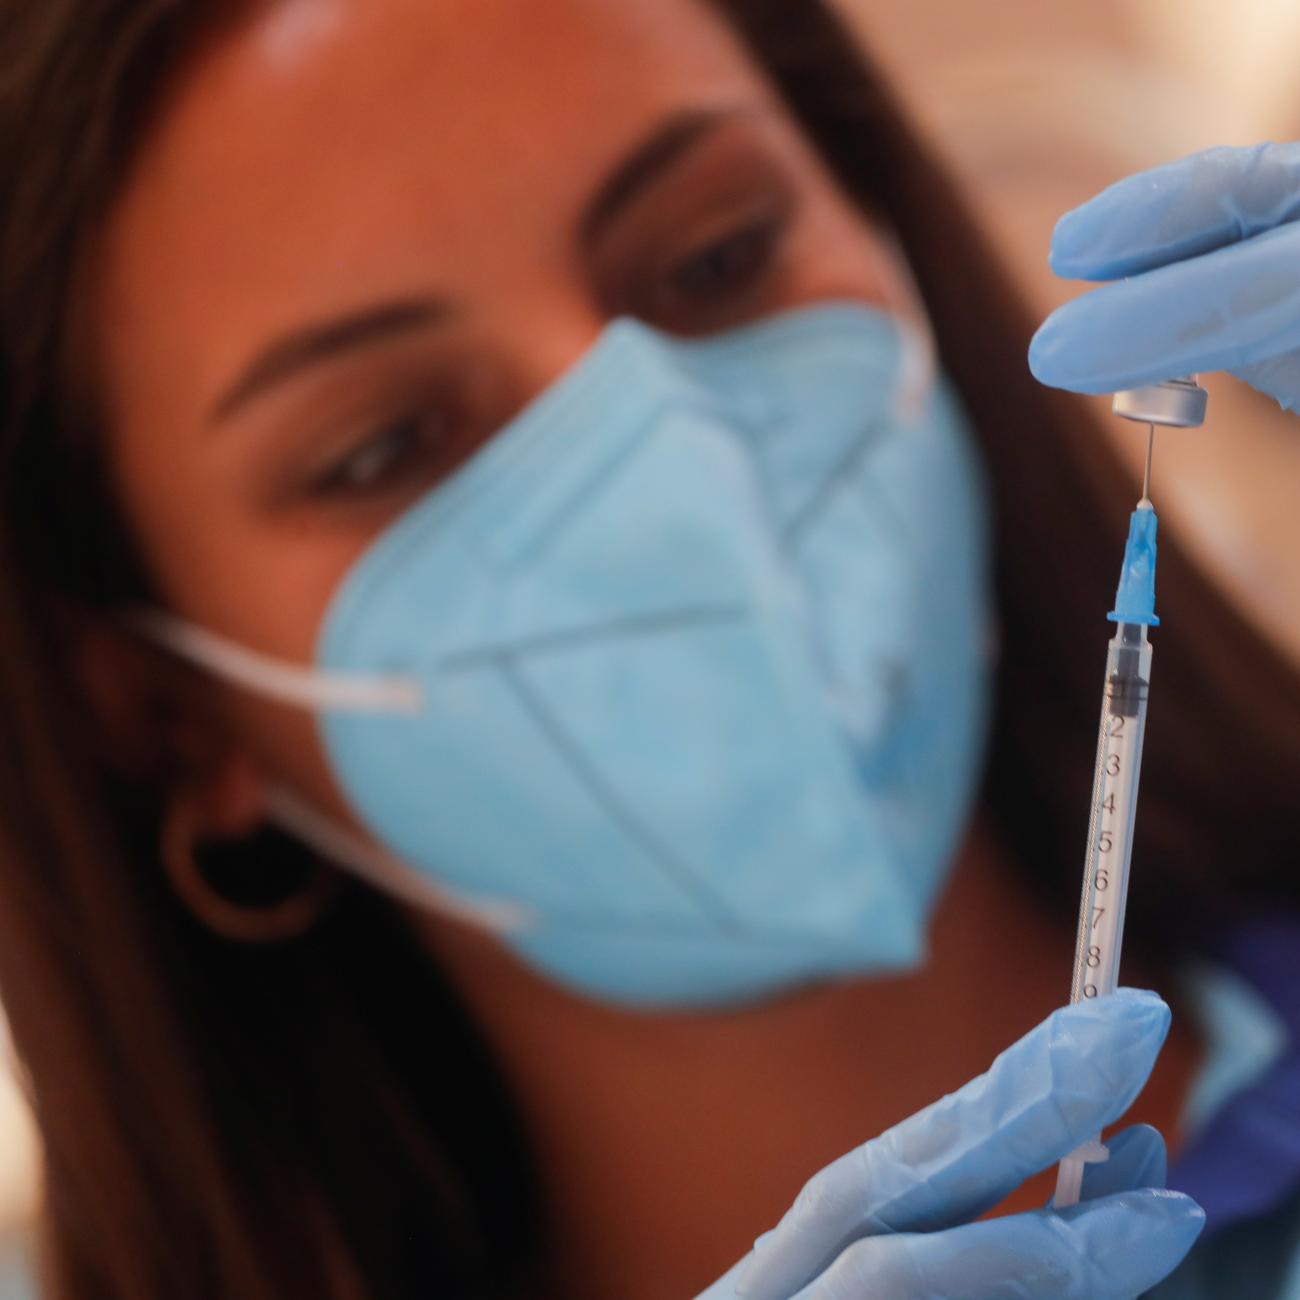 A healthcare worker prepares a dose of the "Comirnaty" Pfizer BioNTech COVID-19 vaccine against the coronavirus disease (COVID-19) at a vaccination centre in Ronda, Spain